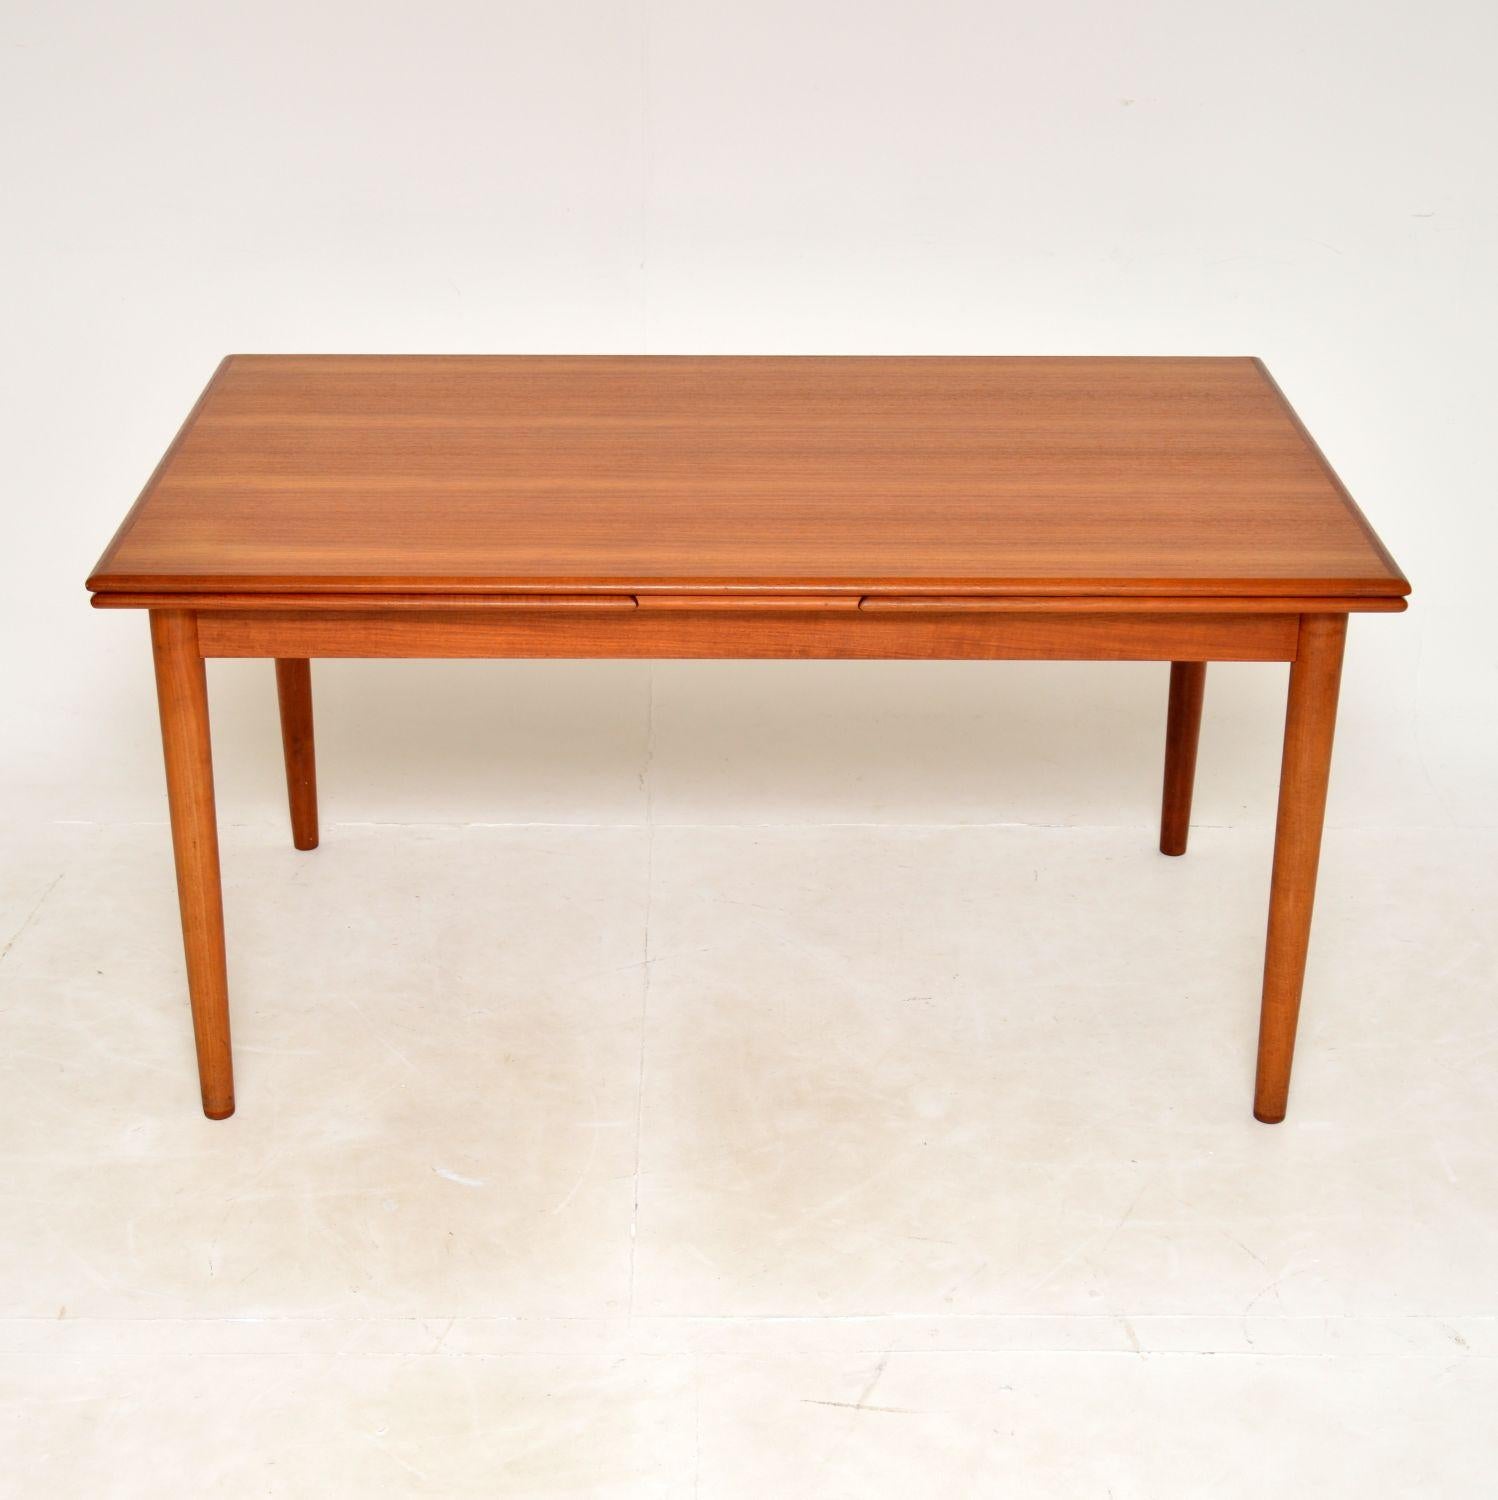 A superb Danish vintage extending dining table in teak. This was made in Denmark, it dates from the 1960’s.
It is of excellent quality and is a great size. There are leaves at each end that slide out to extend this, it can comfortably seat ten when